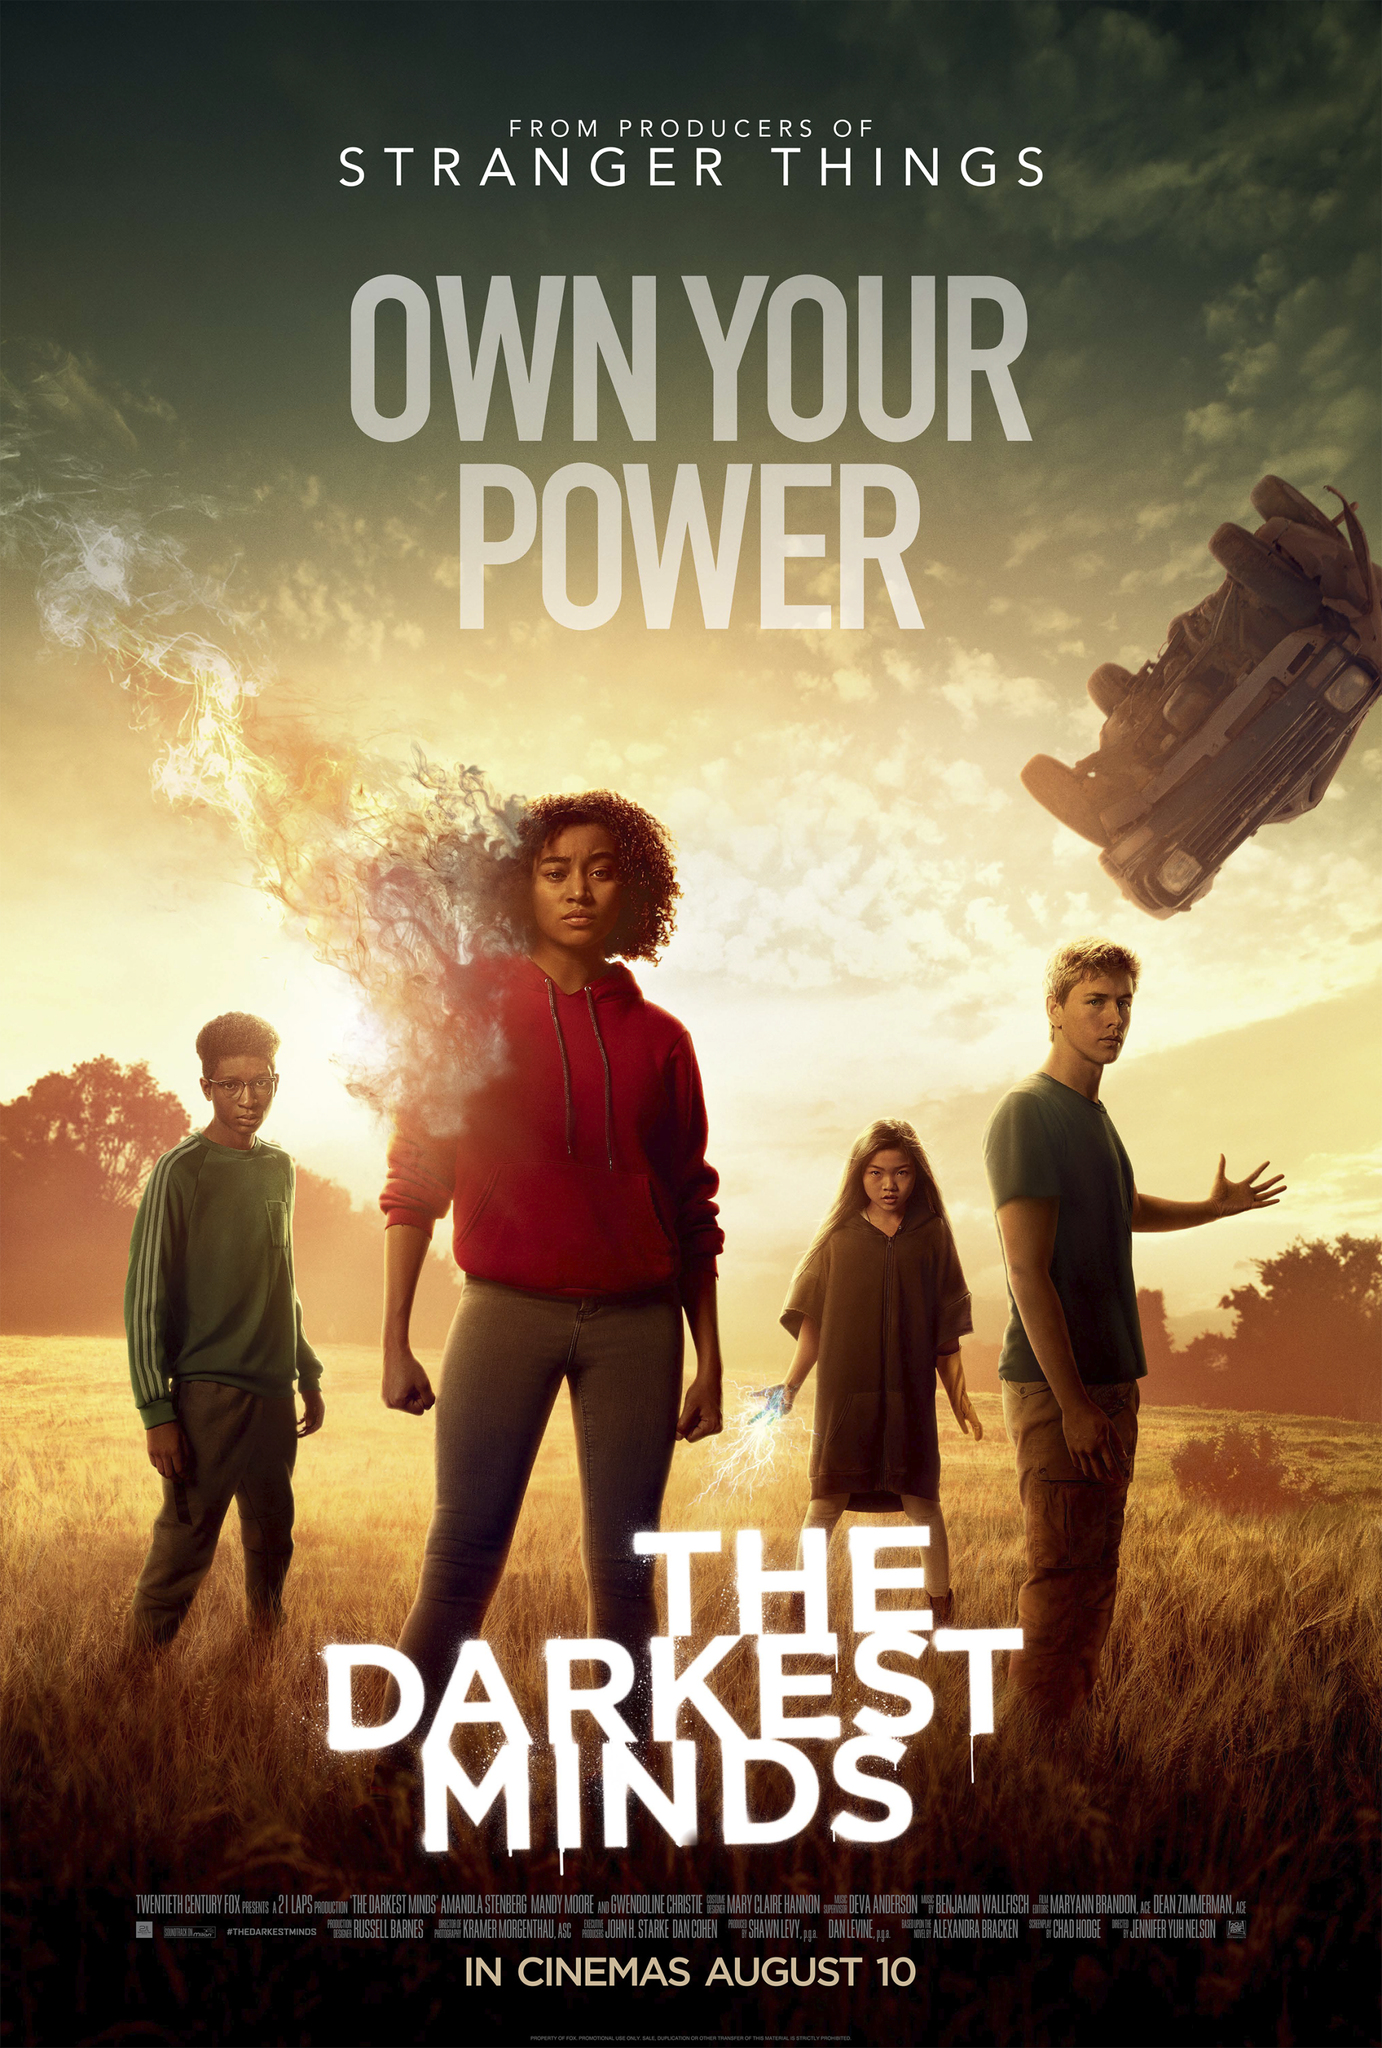 The Darkest Minds film review: the next generation rise up